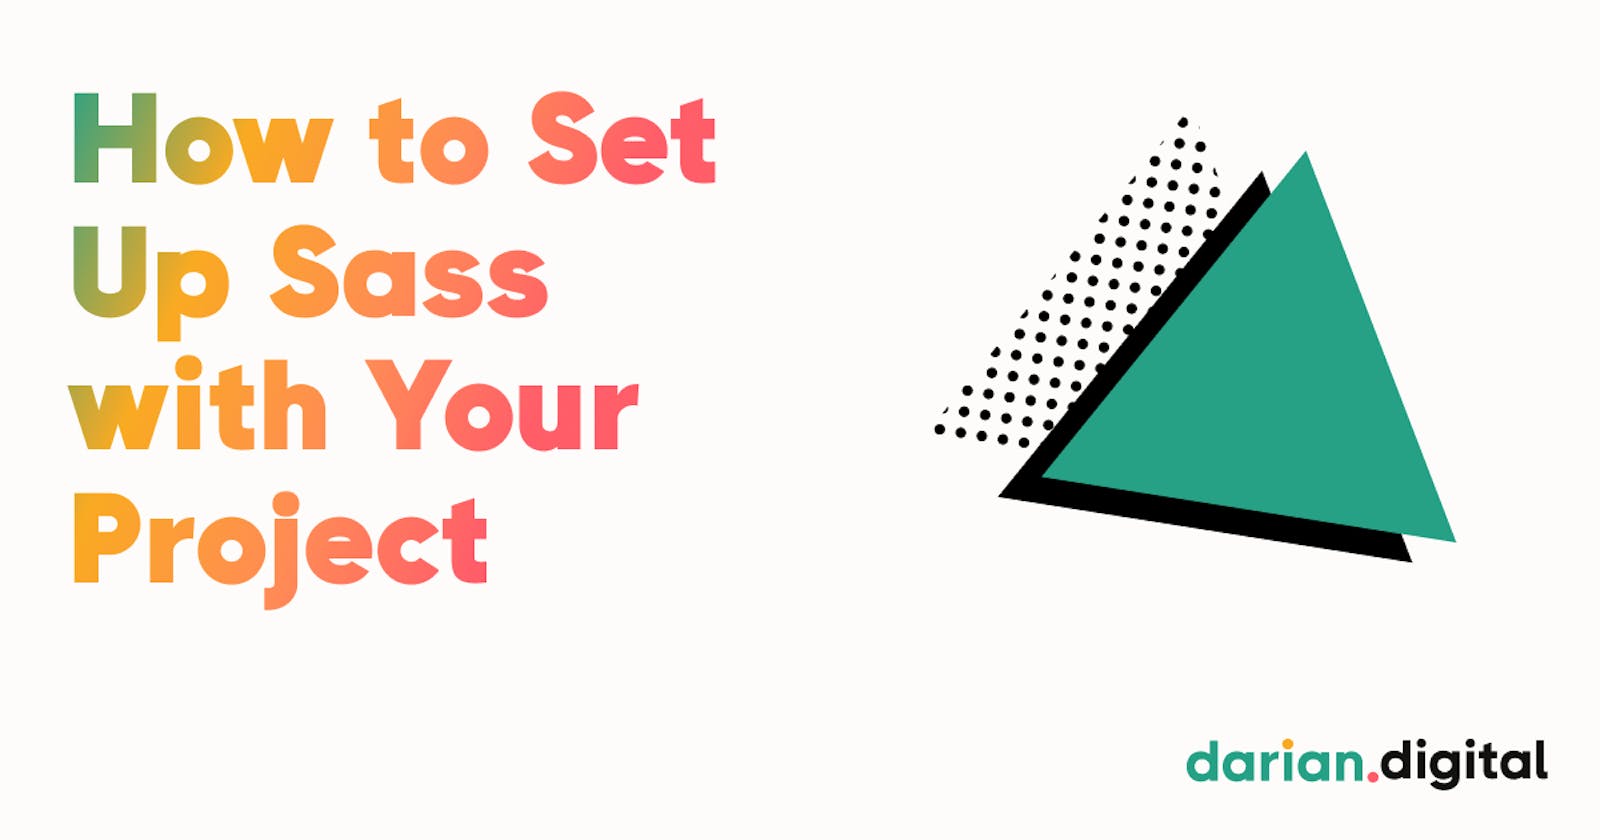 How to Set Up Sass with Your Project